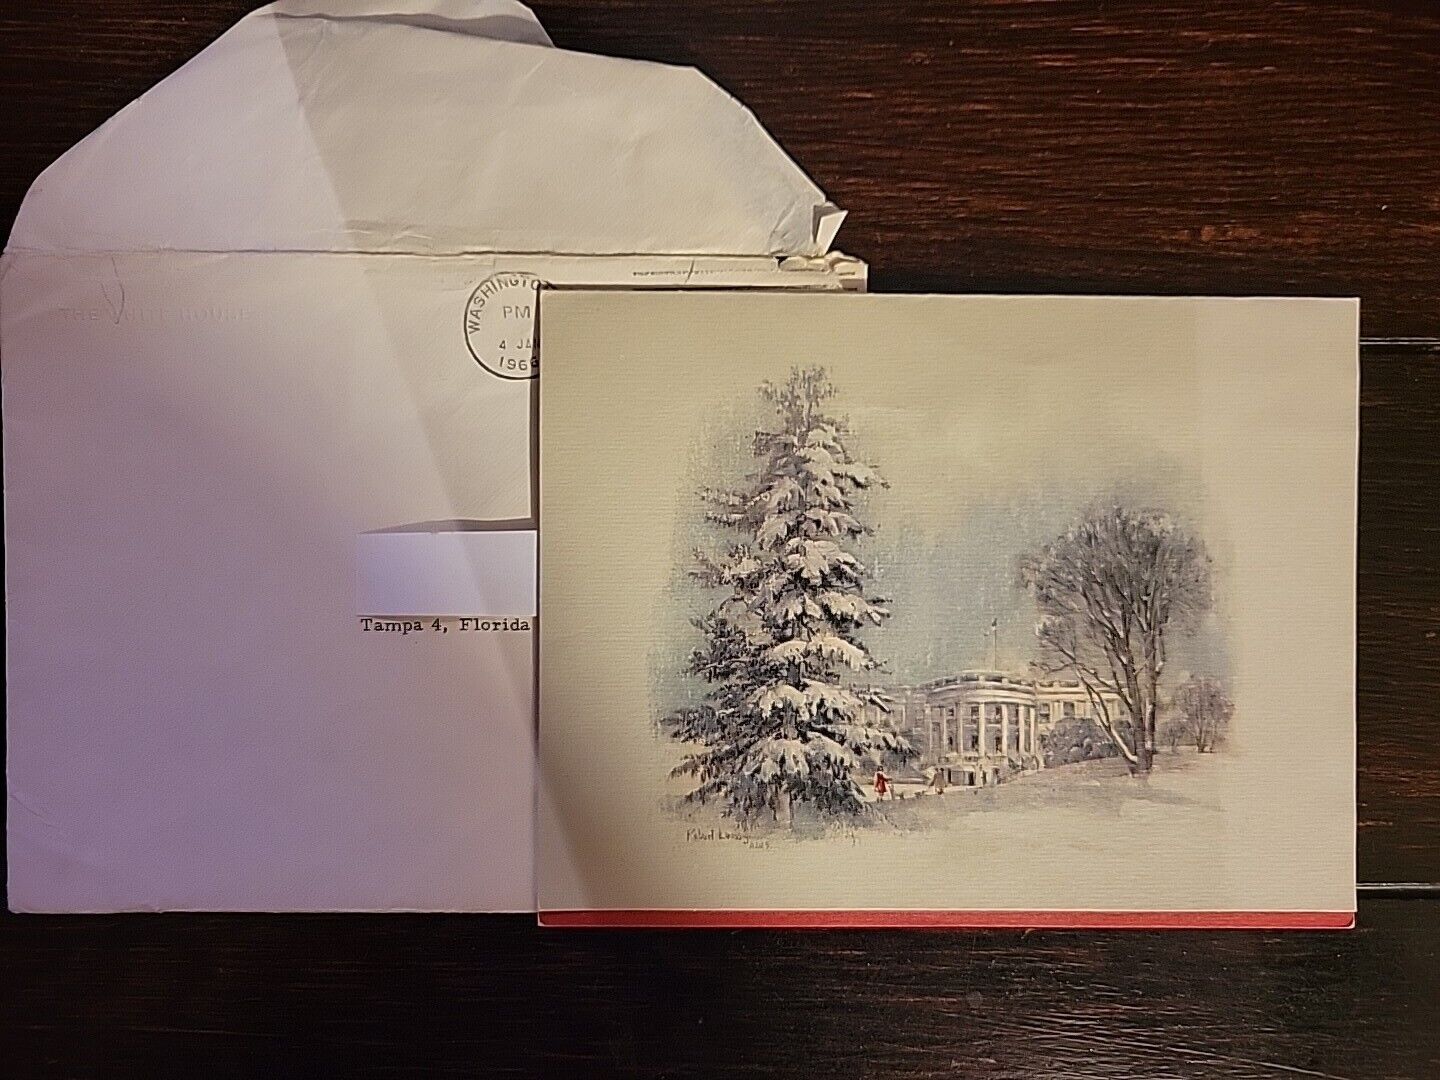 1965 White House Presidential Large Christmas Card Signed by LBJ & Mrs. Johnson